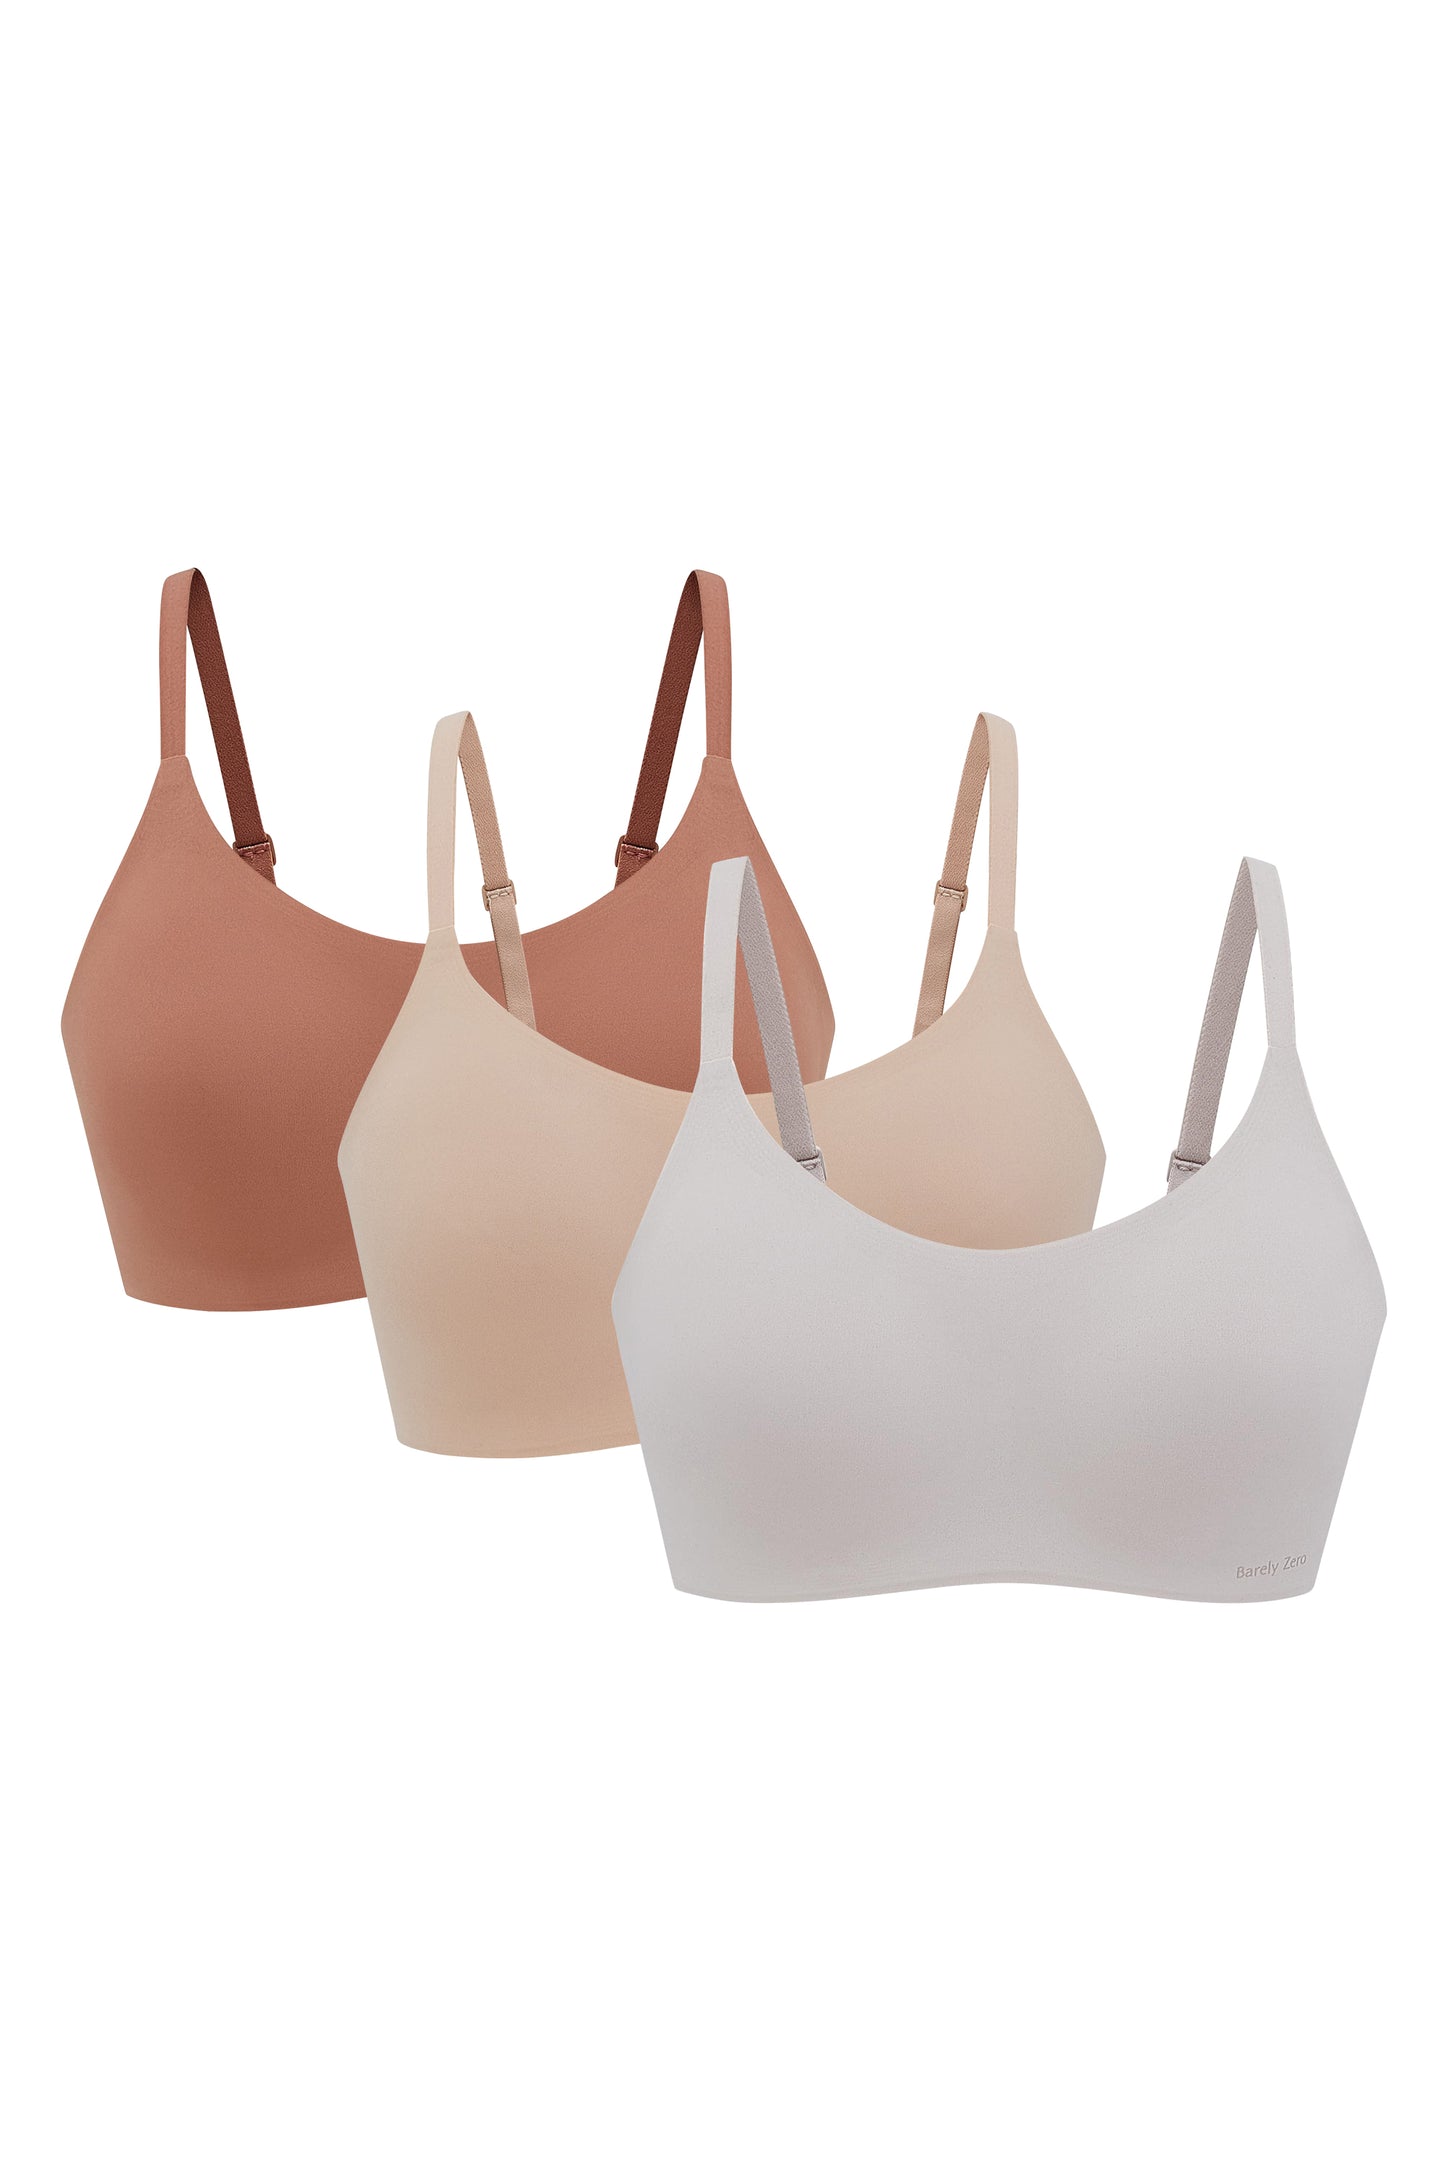 three bras in off white, rust color and beige